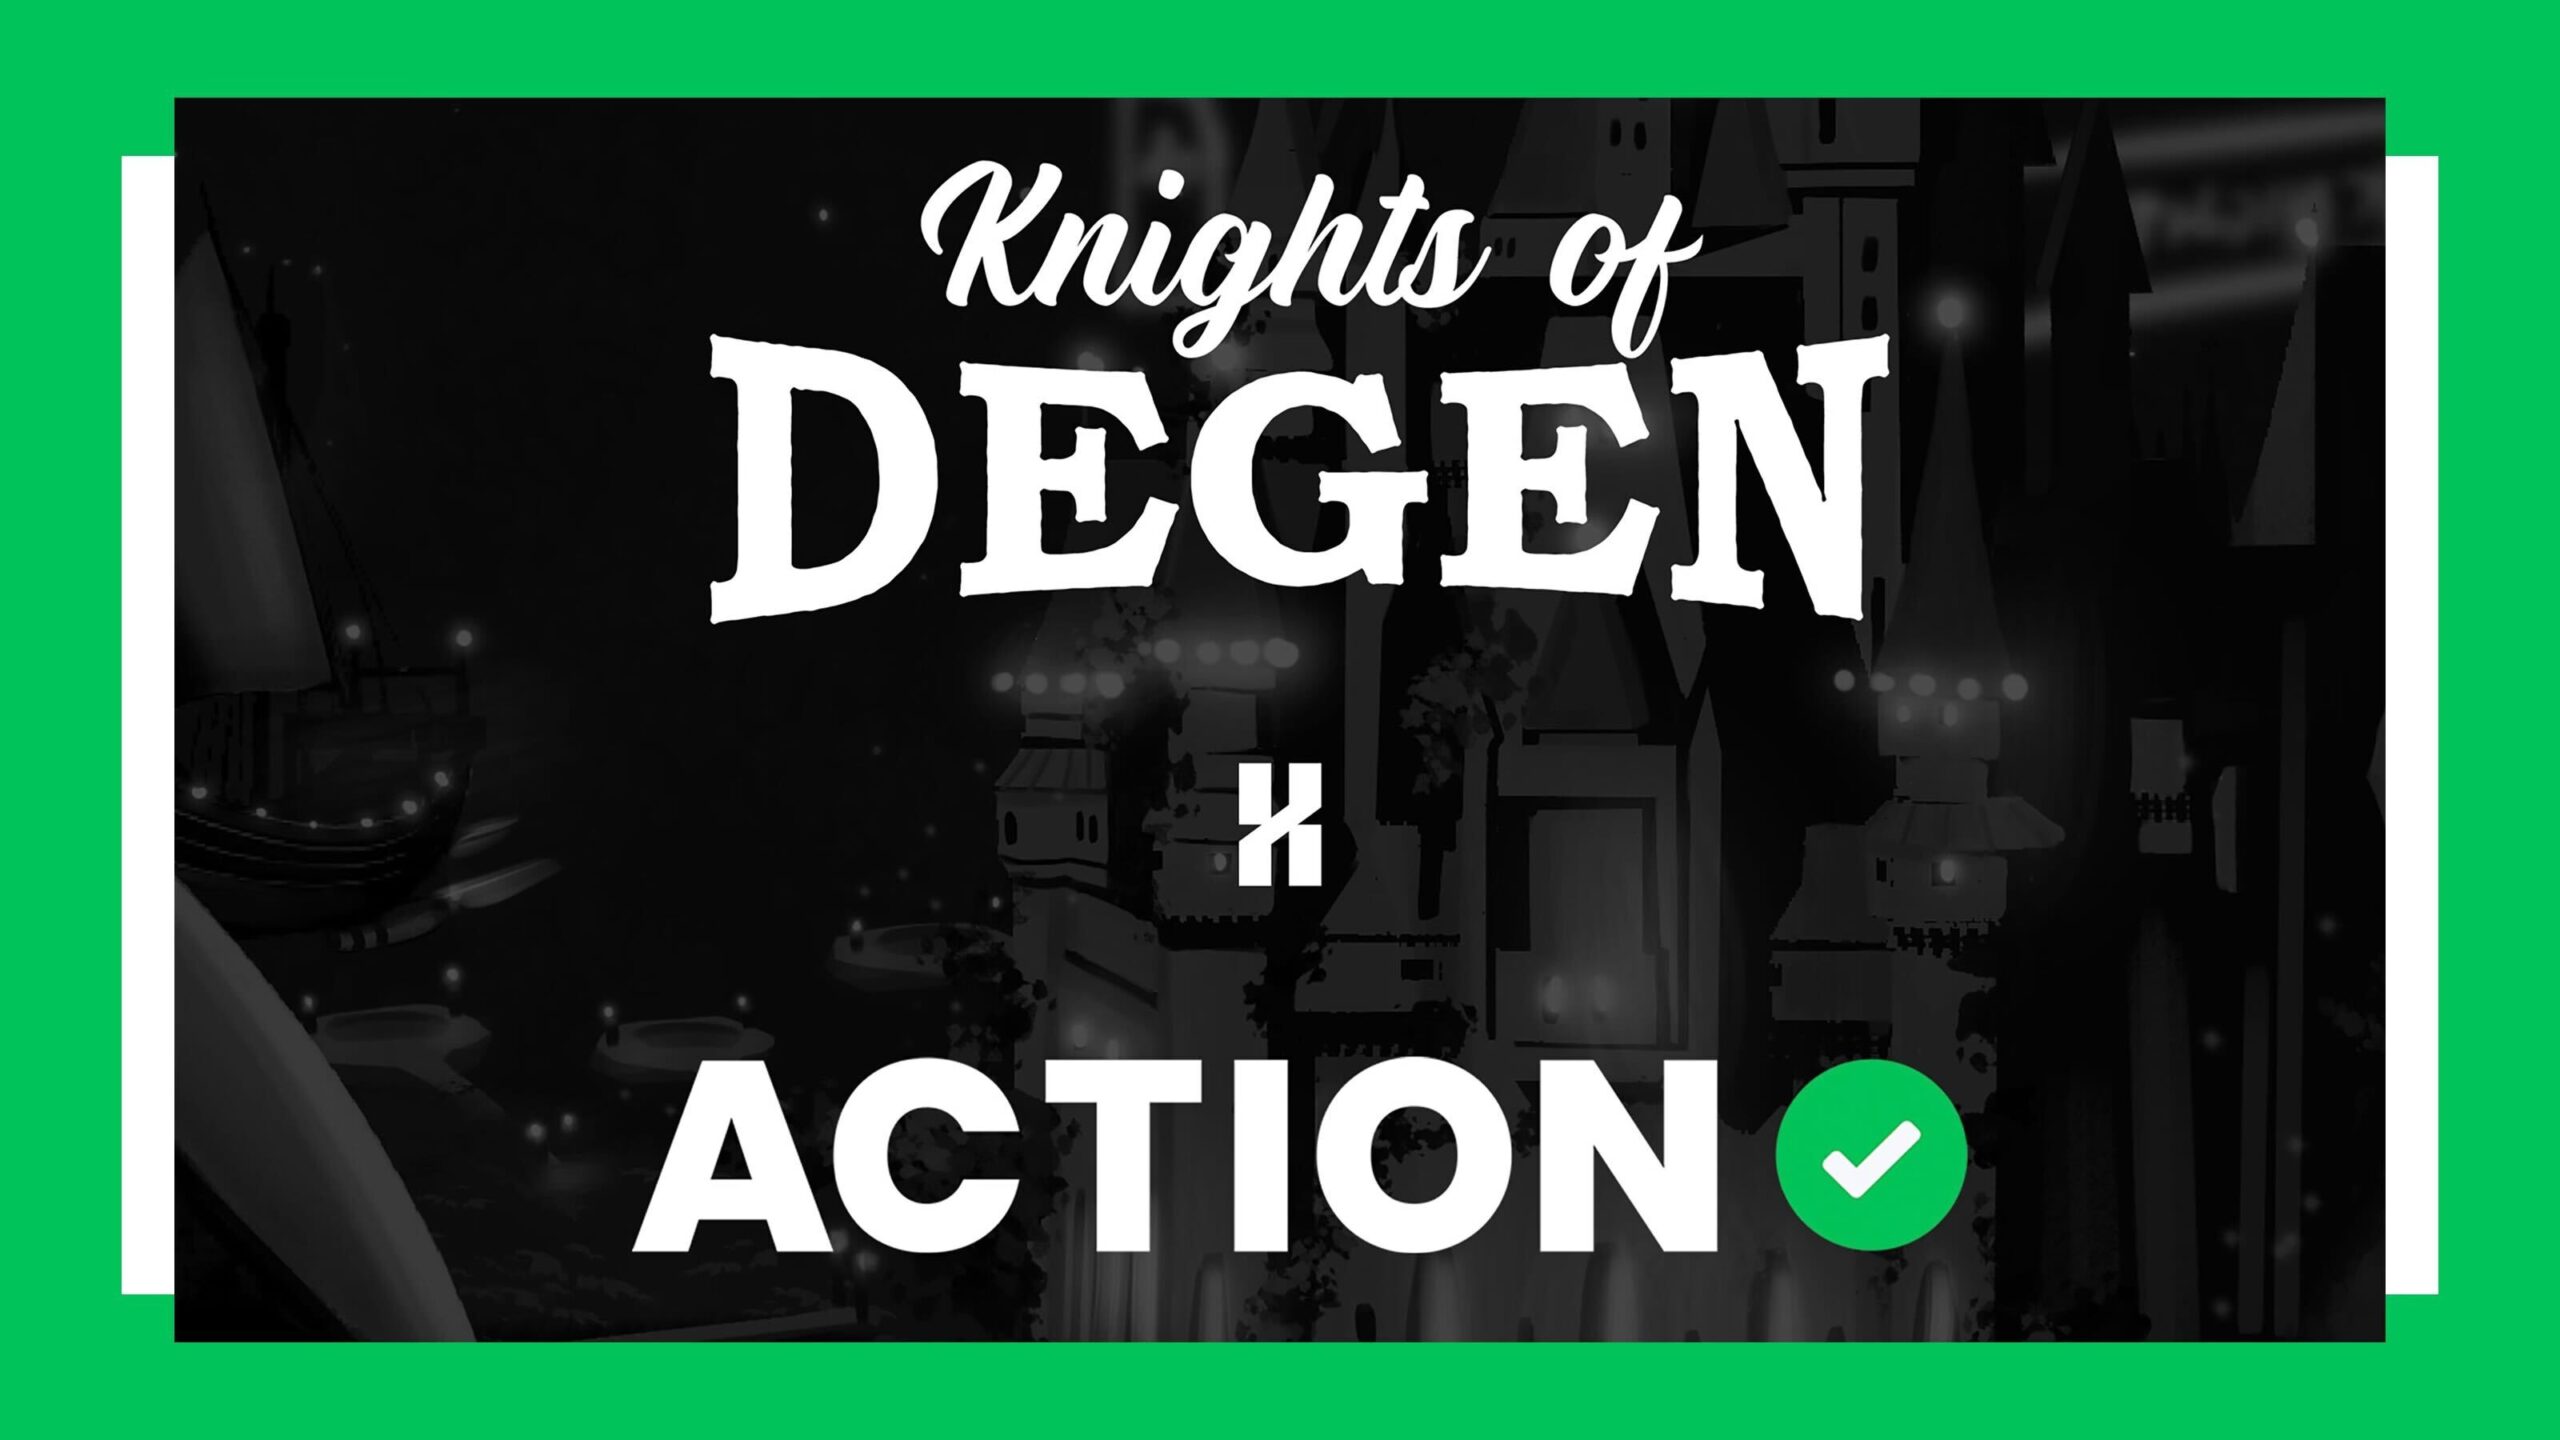 Knights of Degen and Action